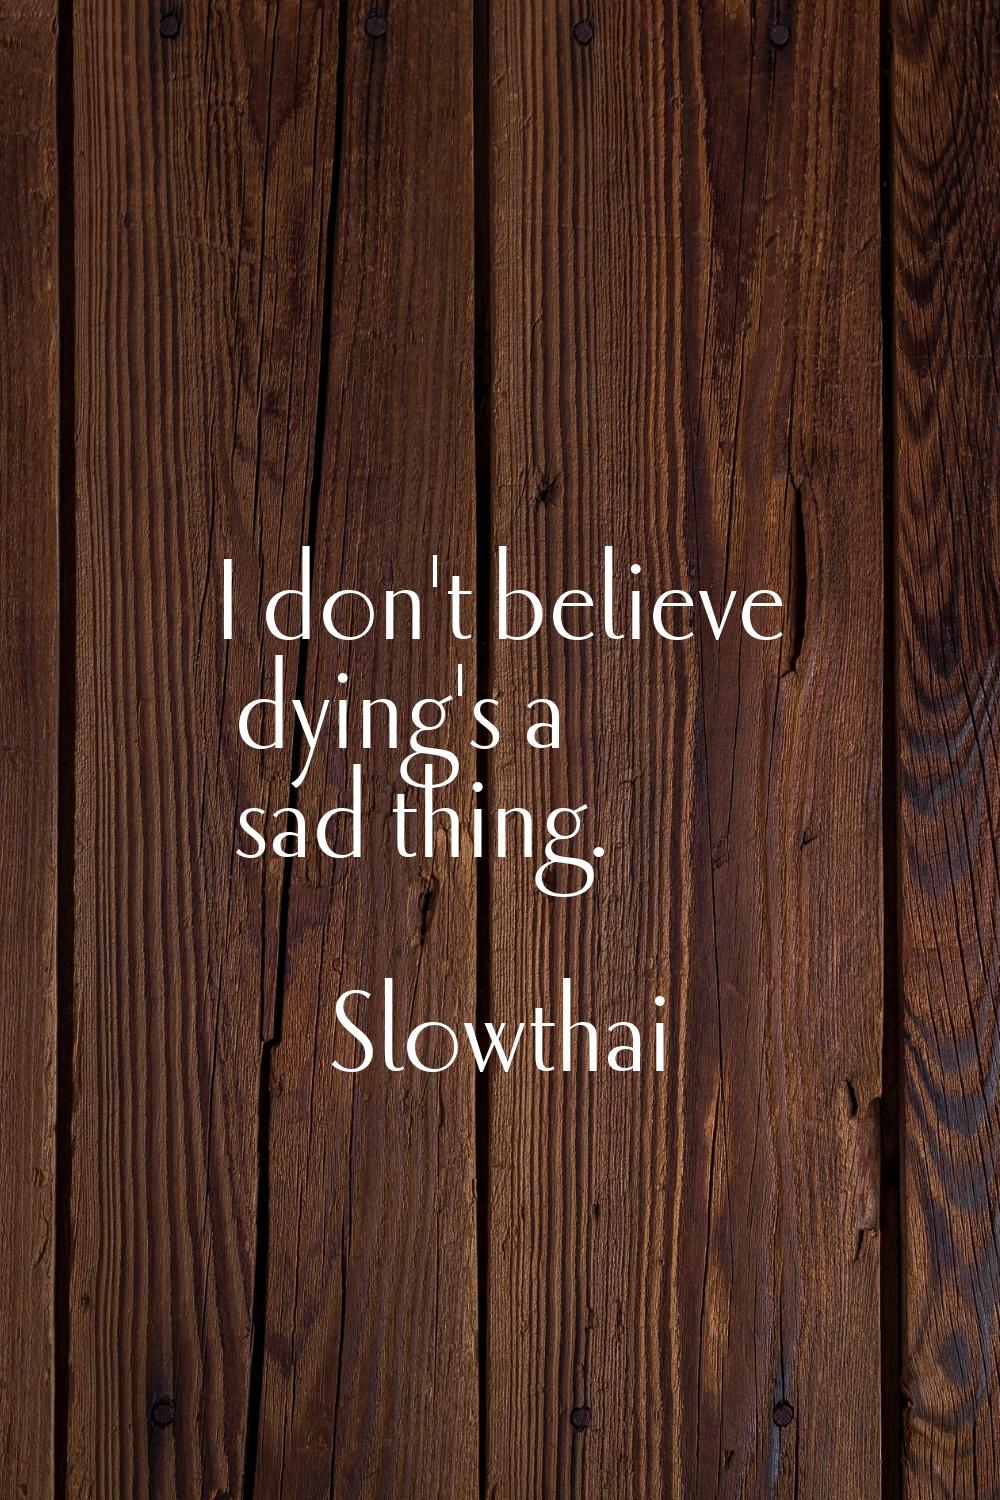 I don't believe dying's a sad thing.